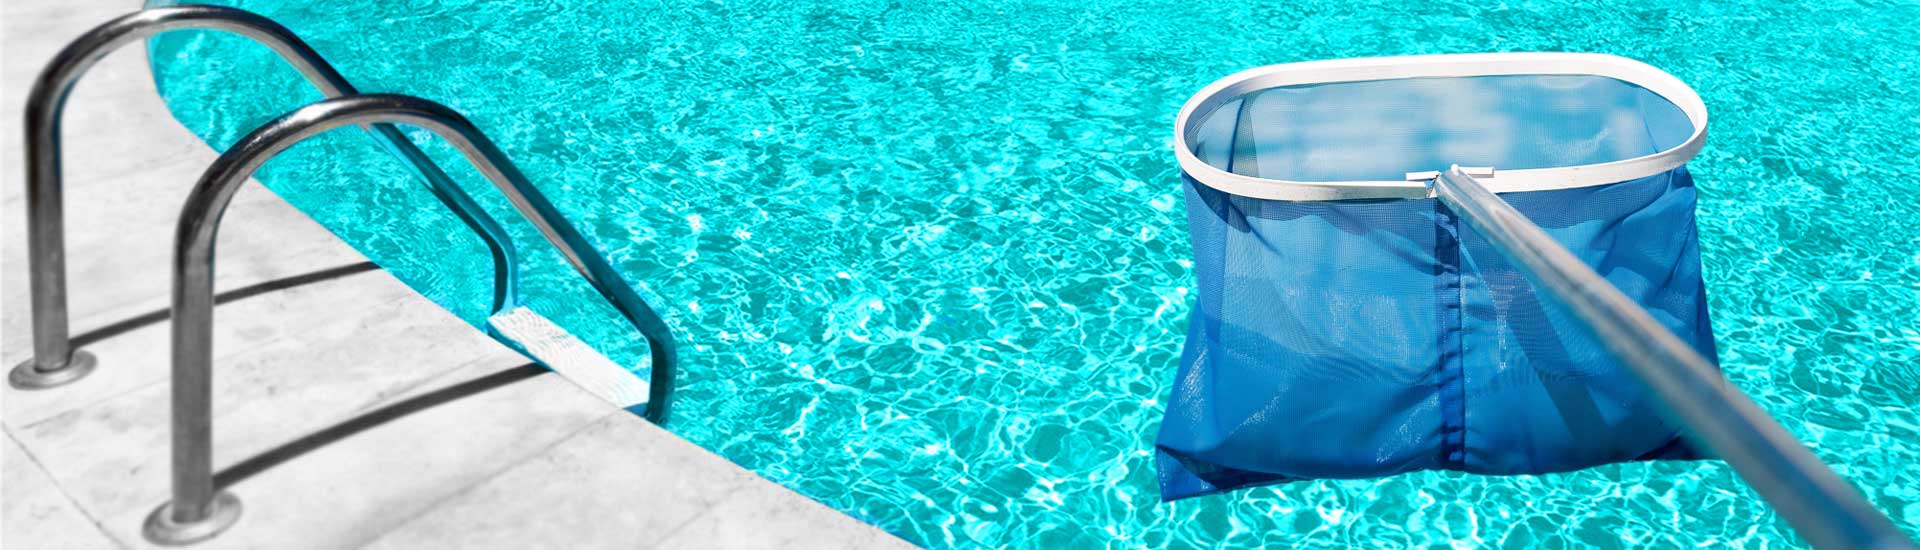 Specialized Maintenance for Agoura Hills Pool Services